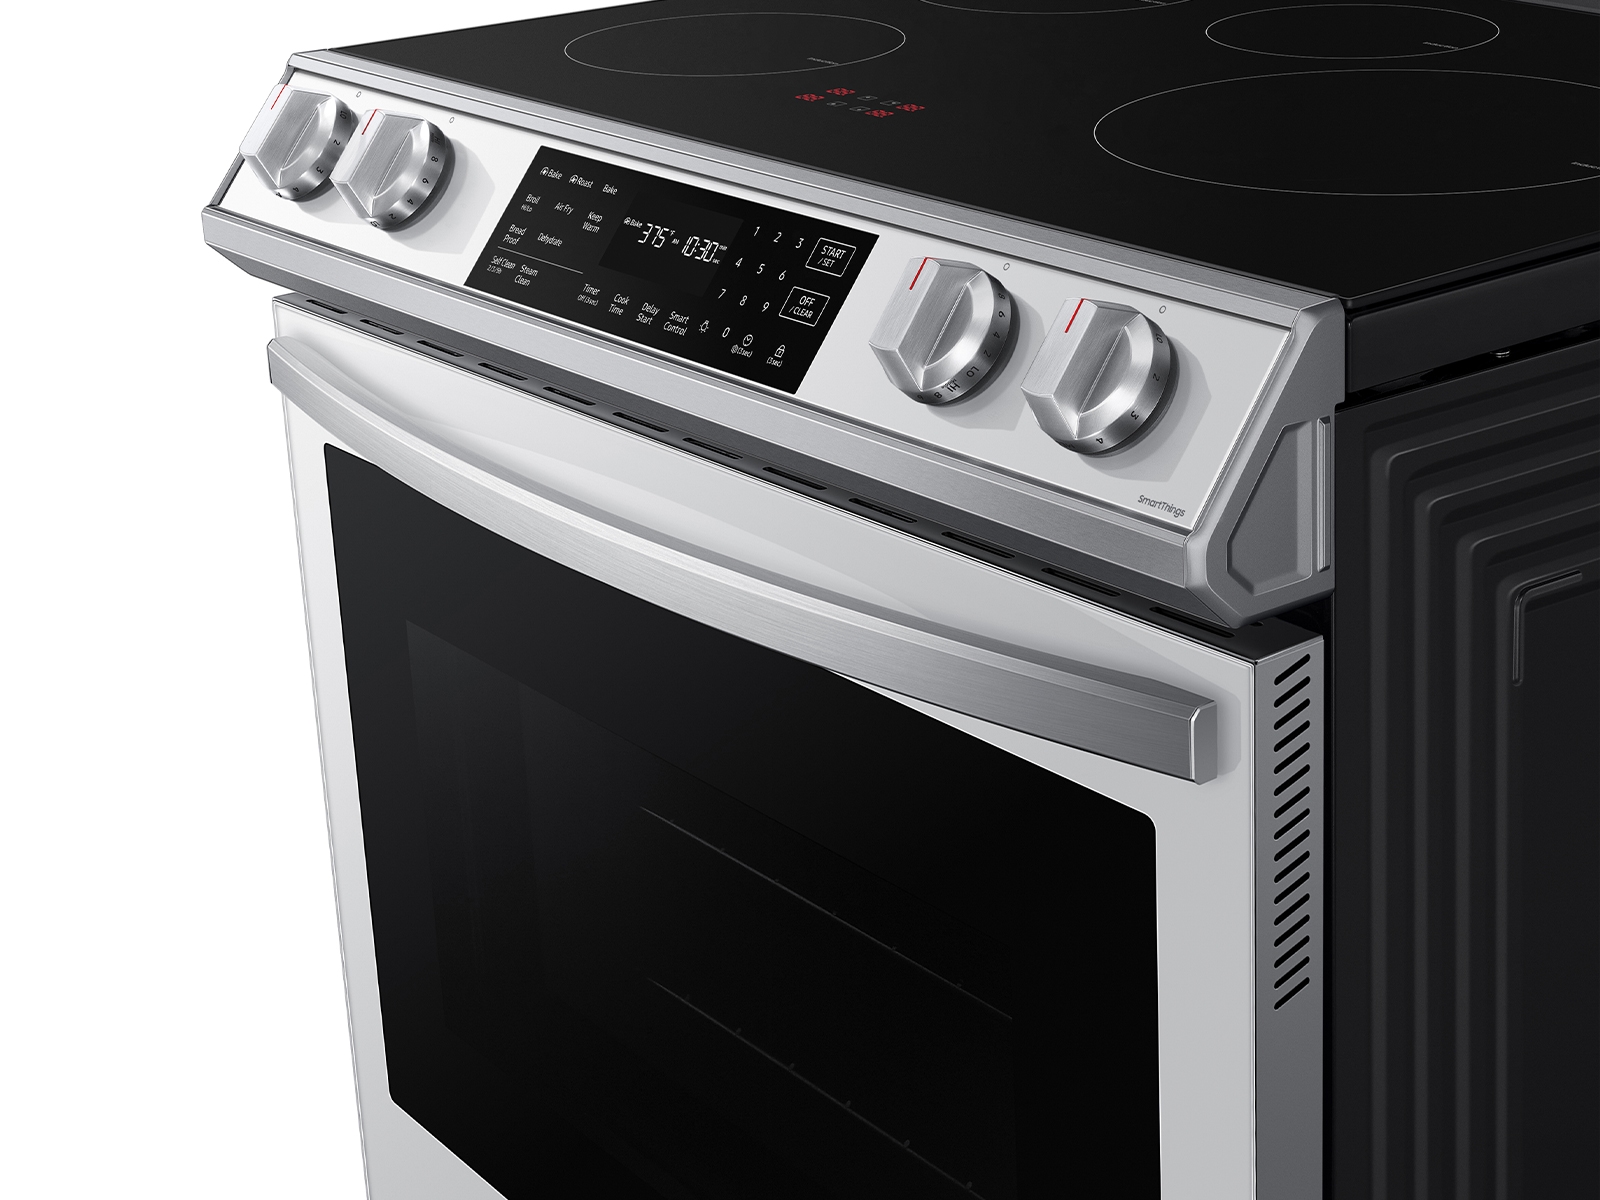 NEW $2200 Samsung INDUCTION Air Fry Convection Slide-In Electric